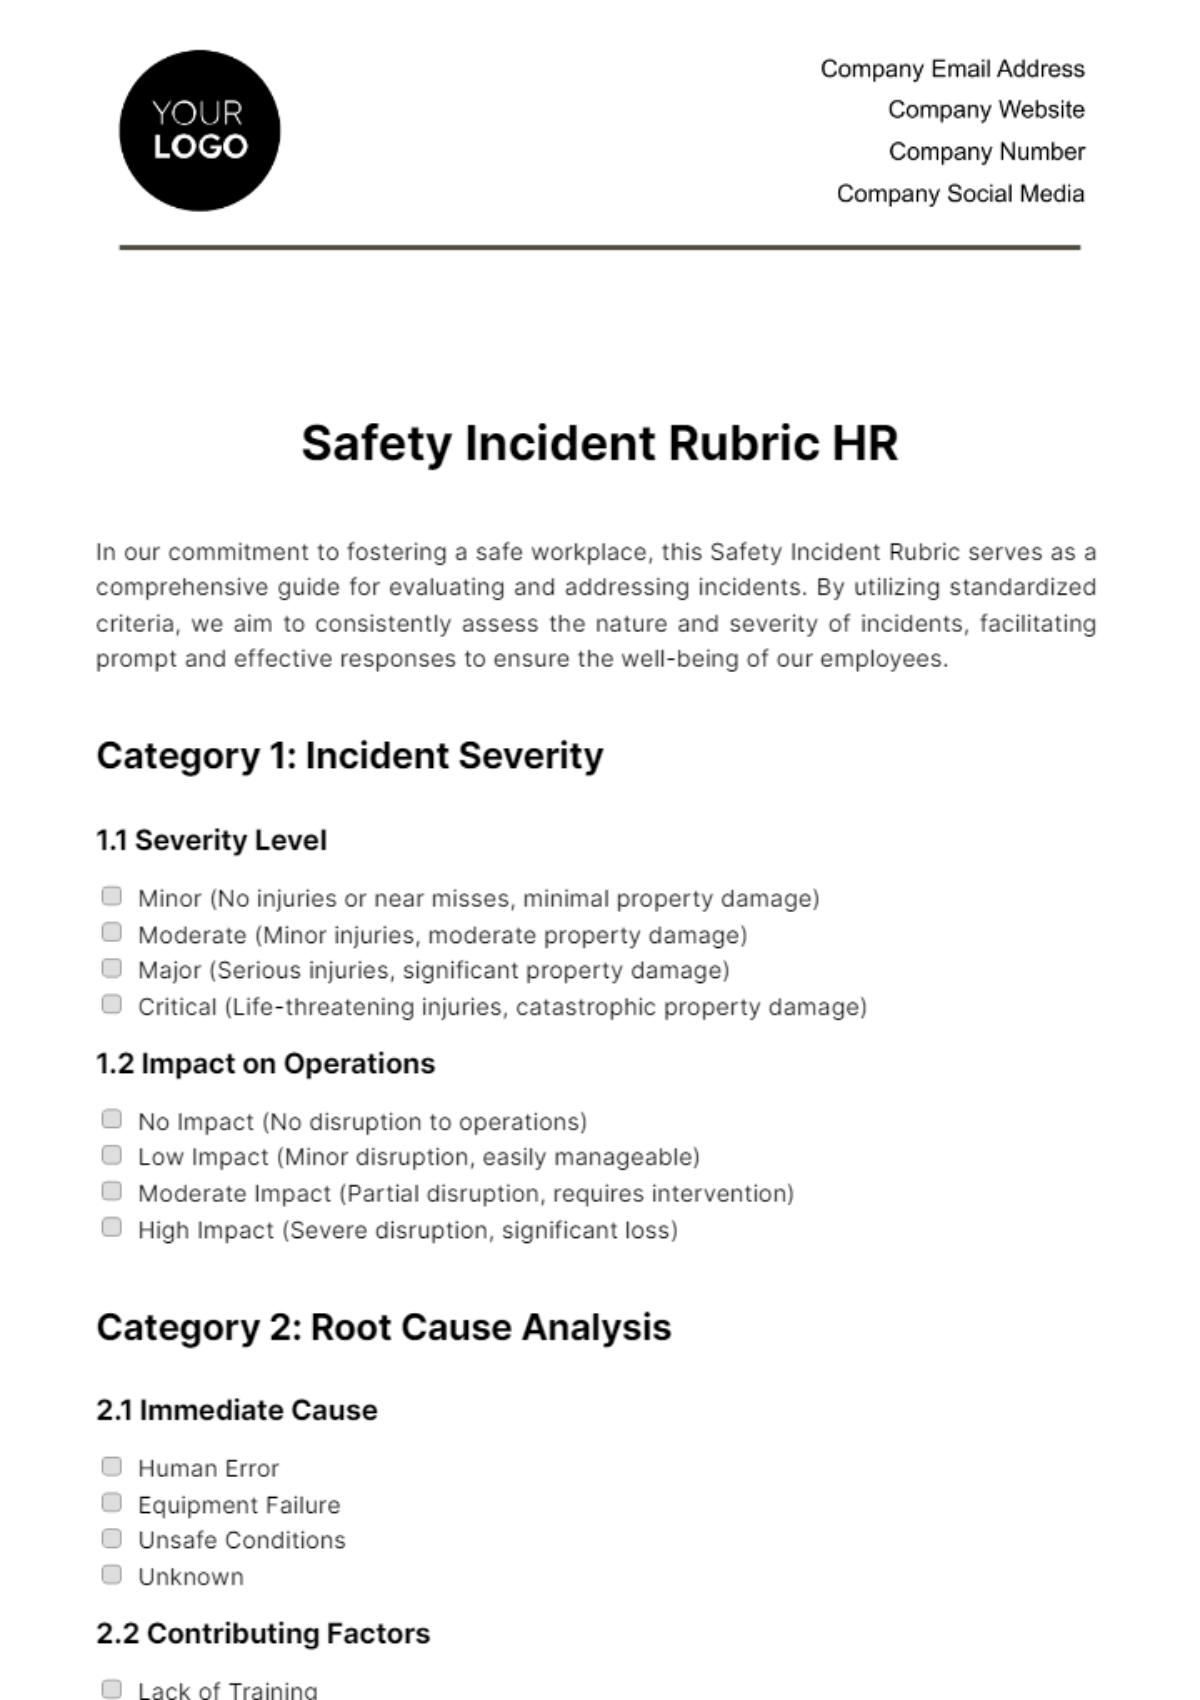 Free Safety Incident Rubric HR Template